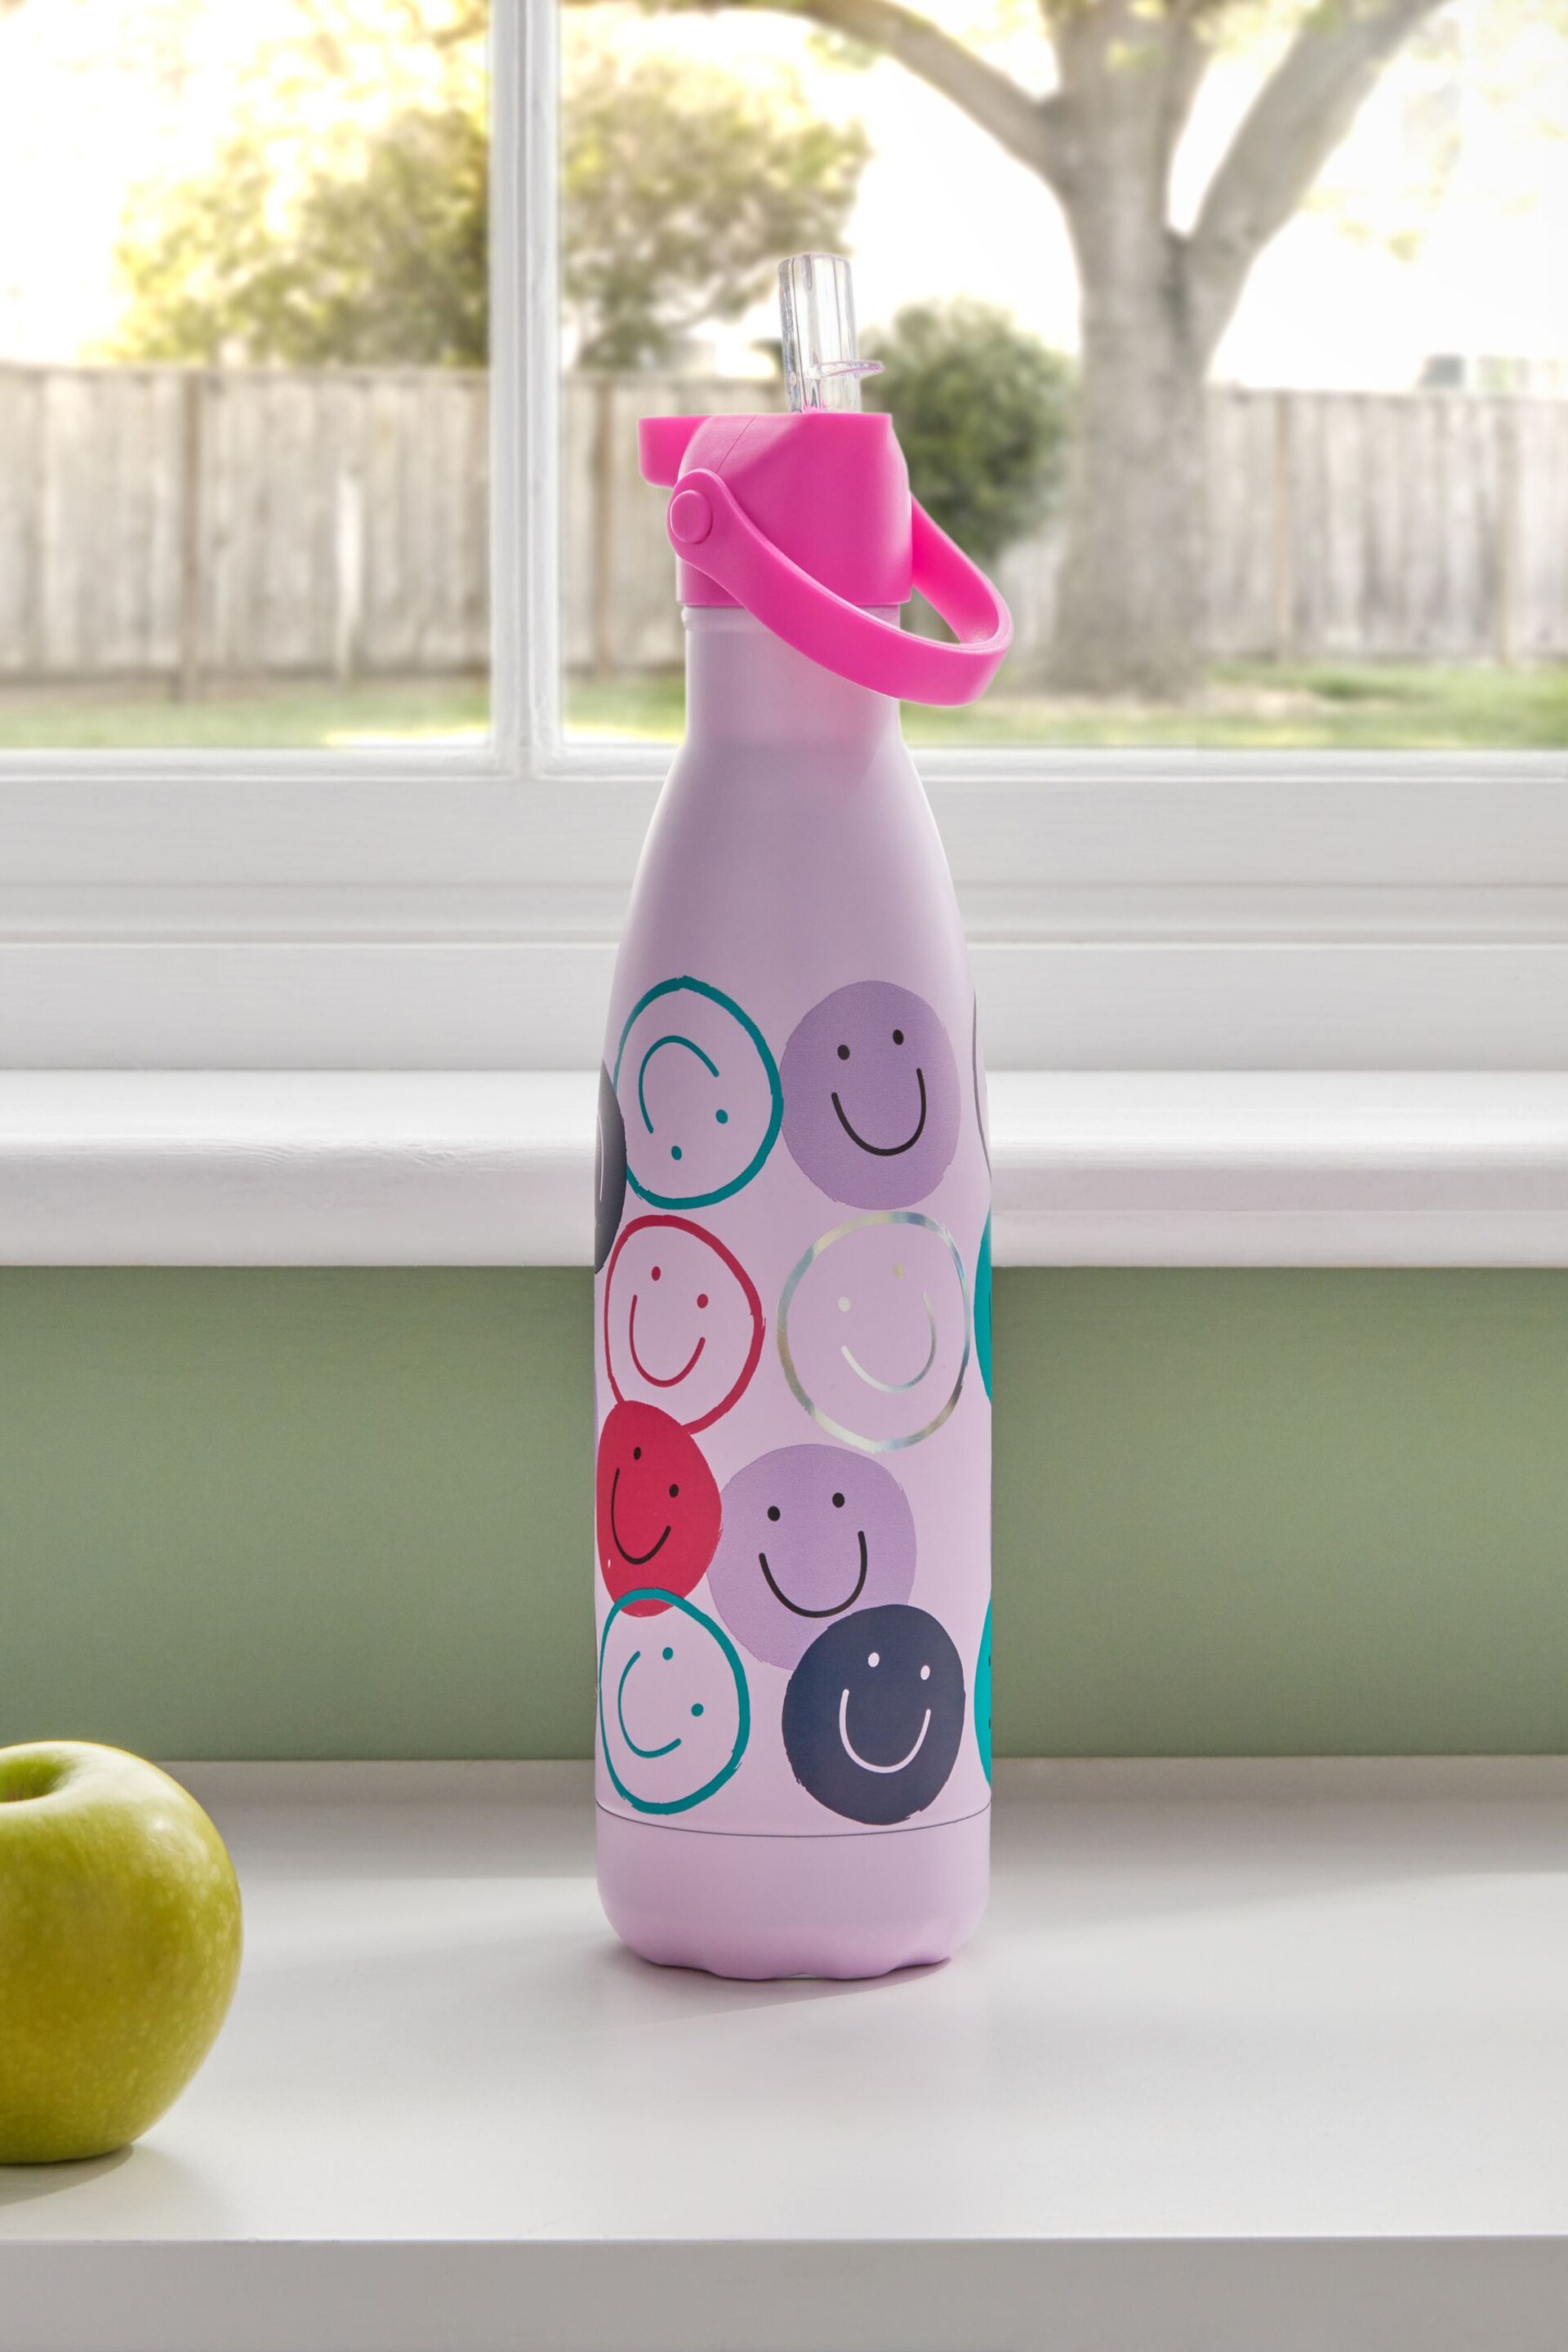 Pink Smiley Faces Metal Water Bottle - Image 1 of 3